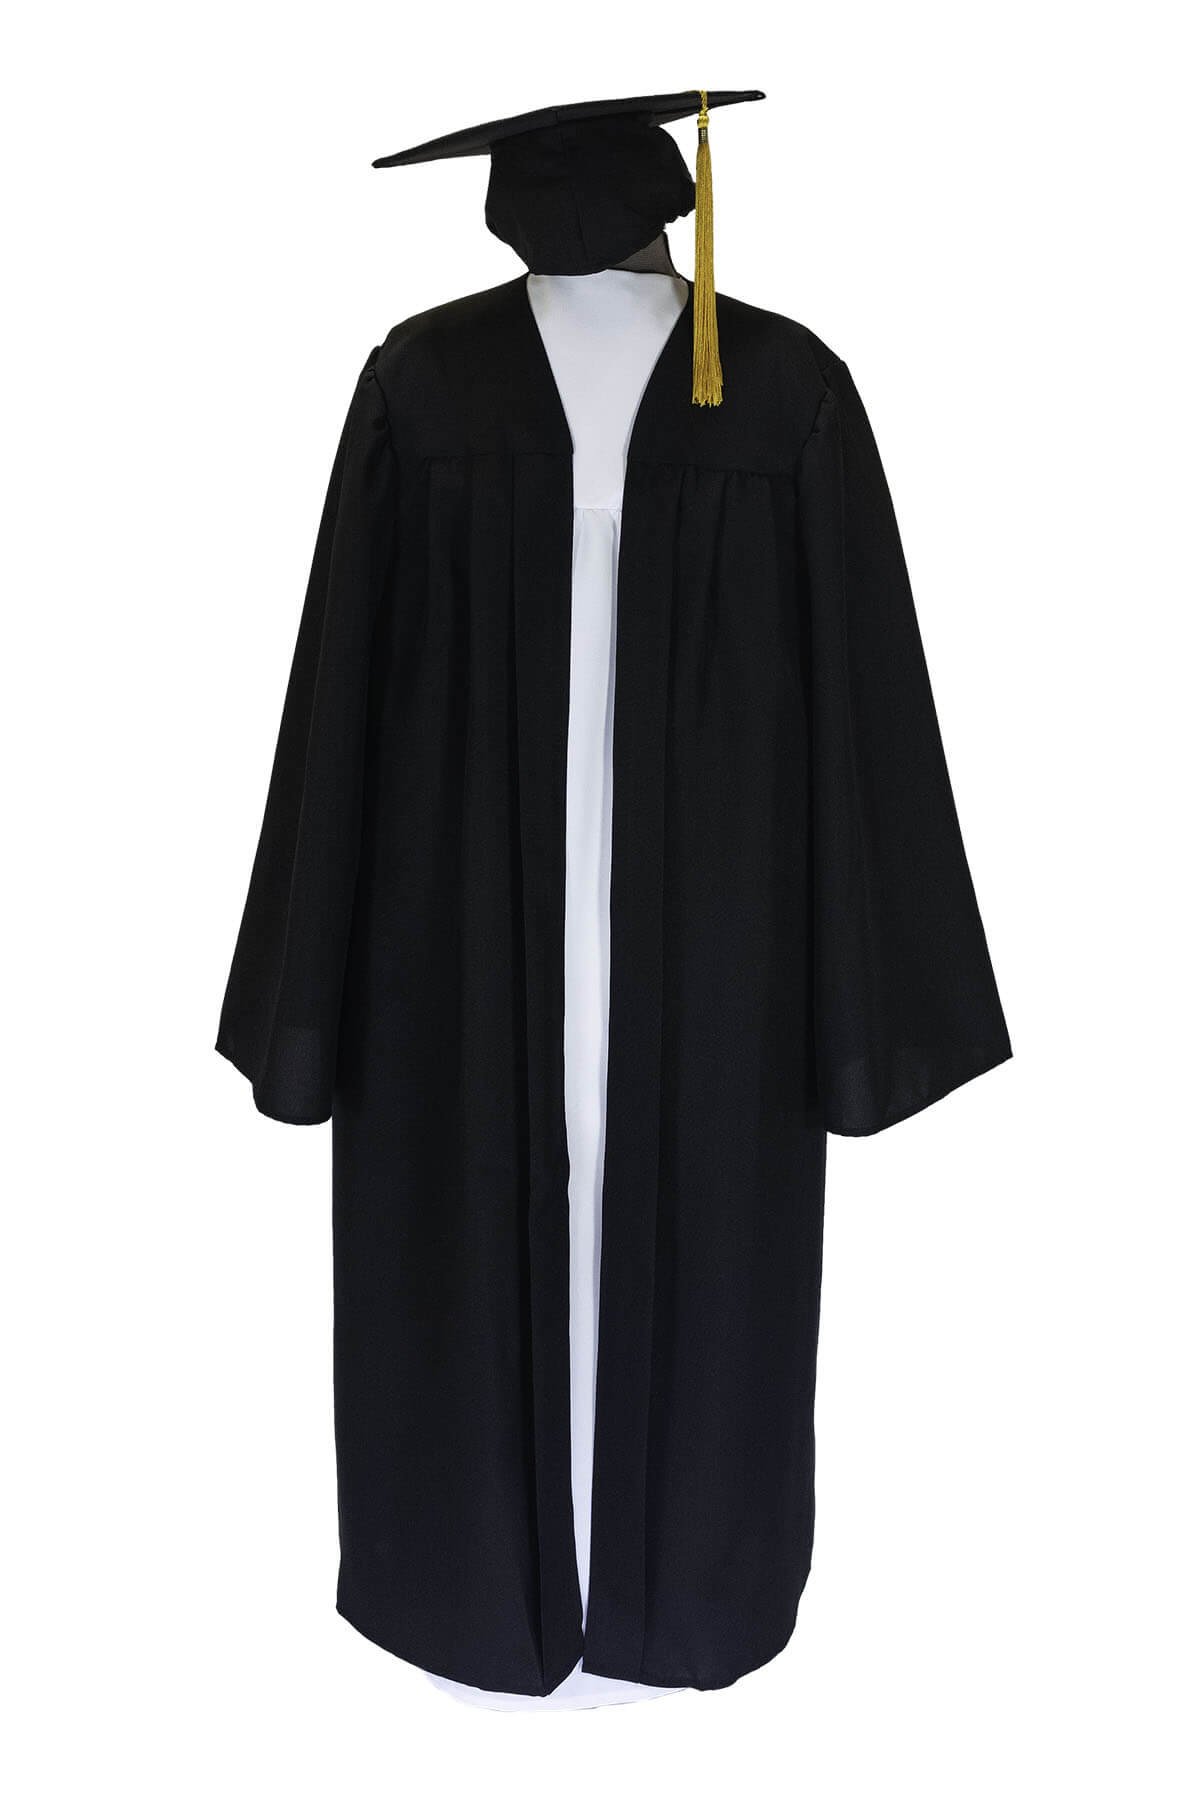 PhinisheD Gown: Made-to-Order PhD Gown